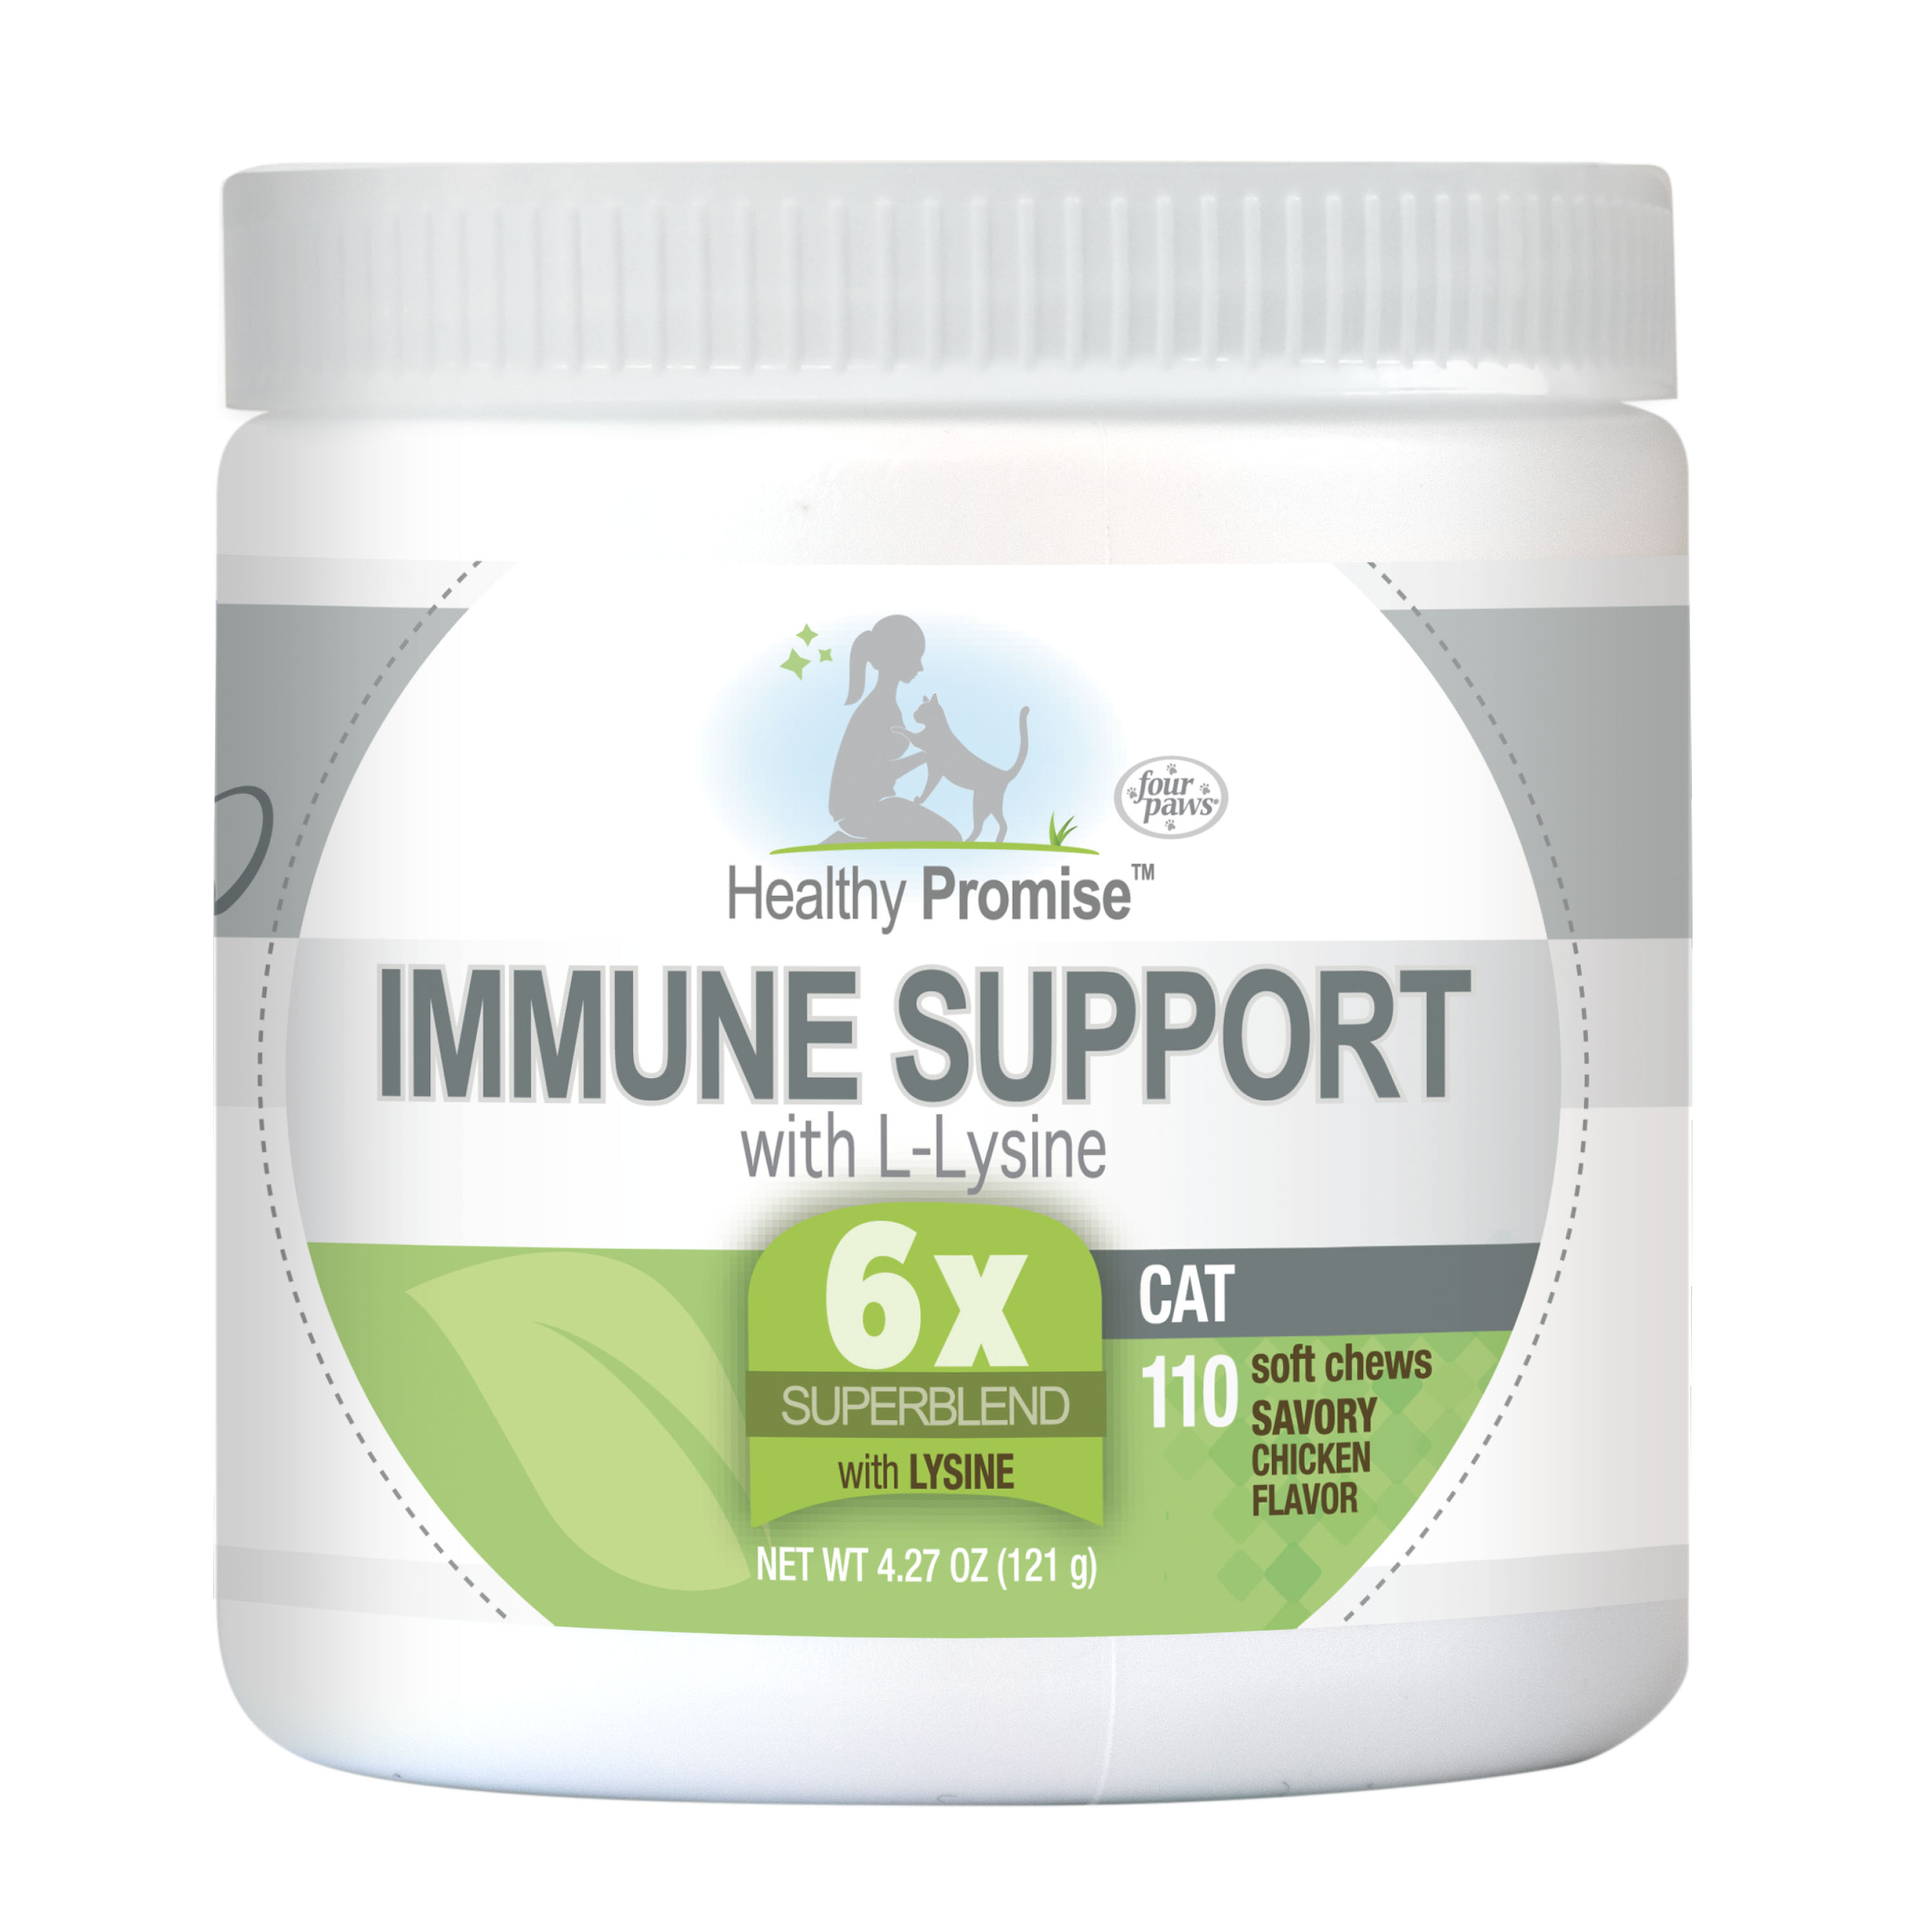 Immune support for cats front of package